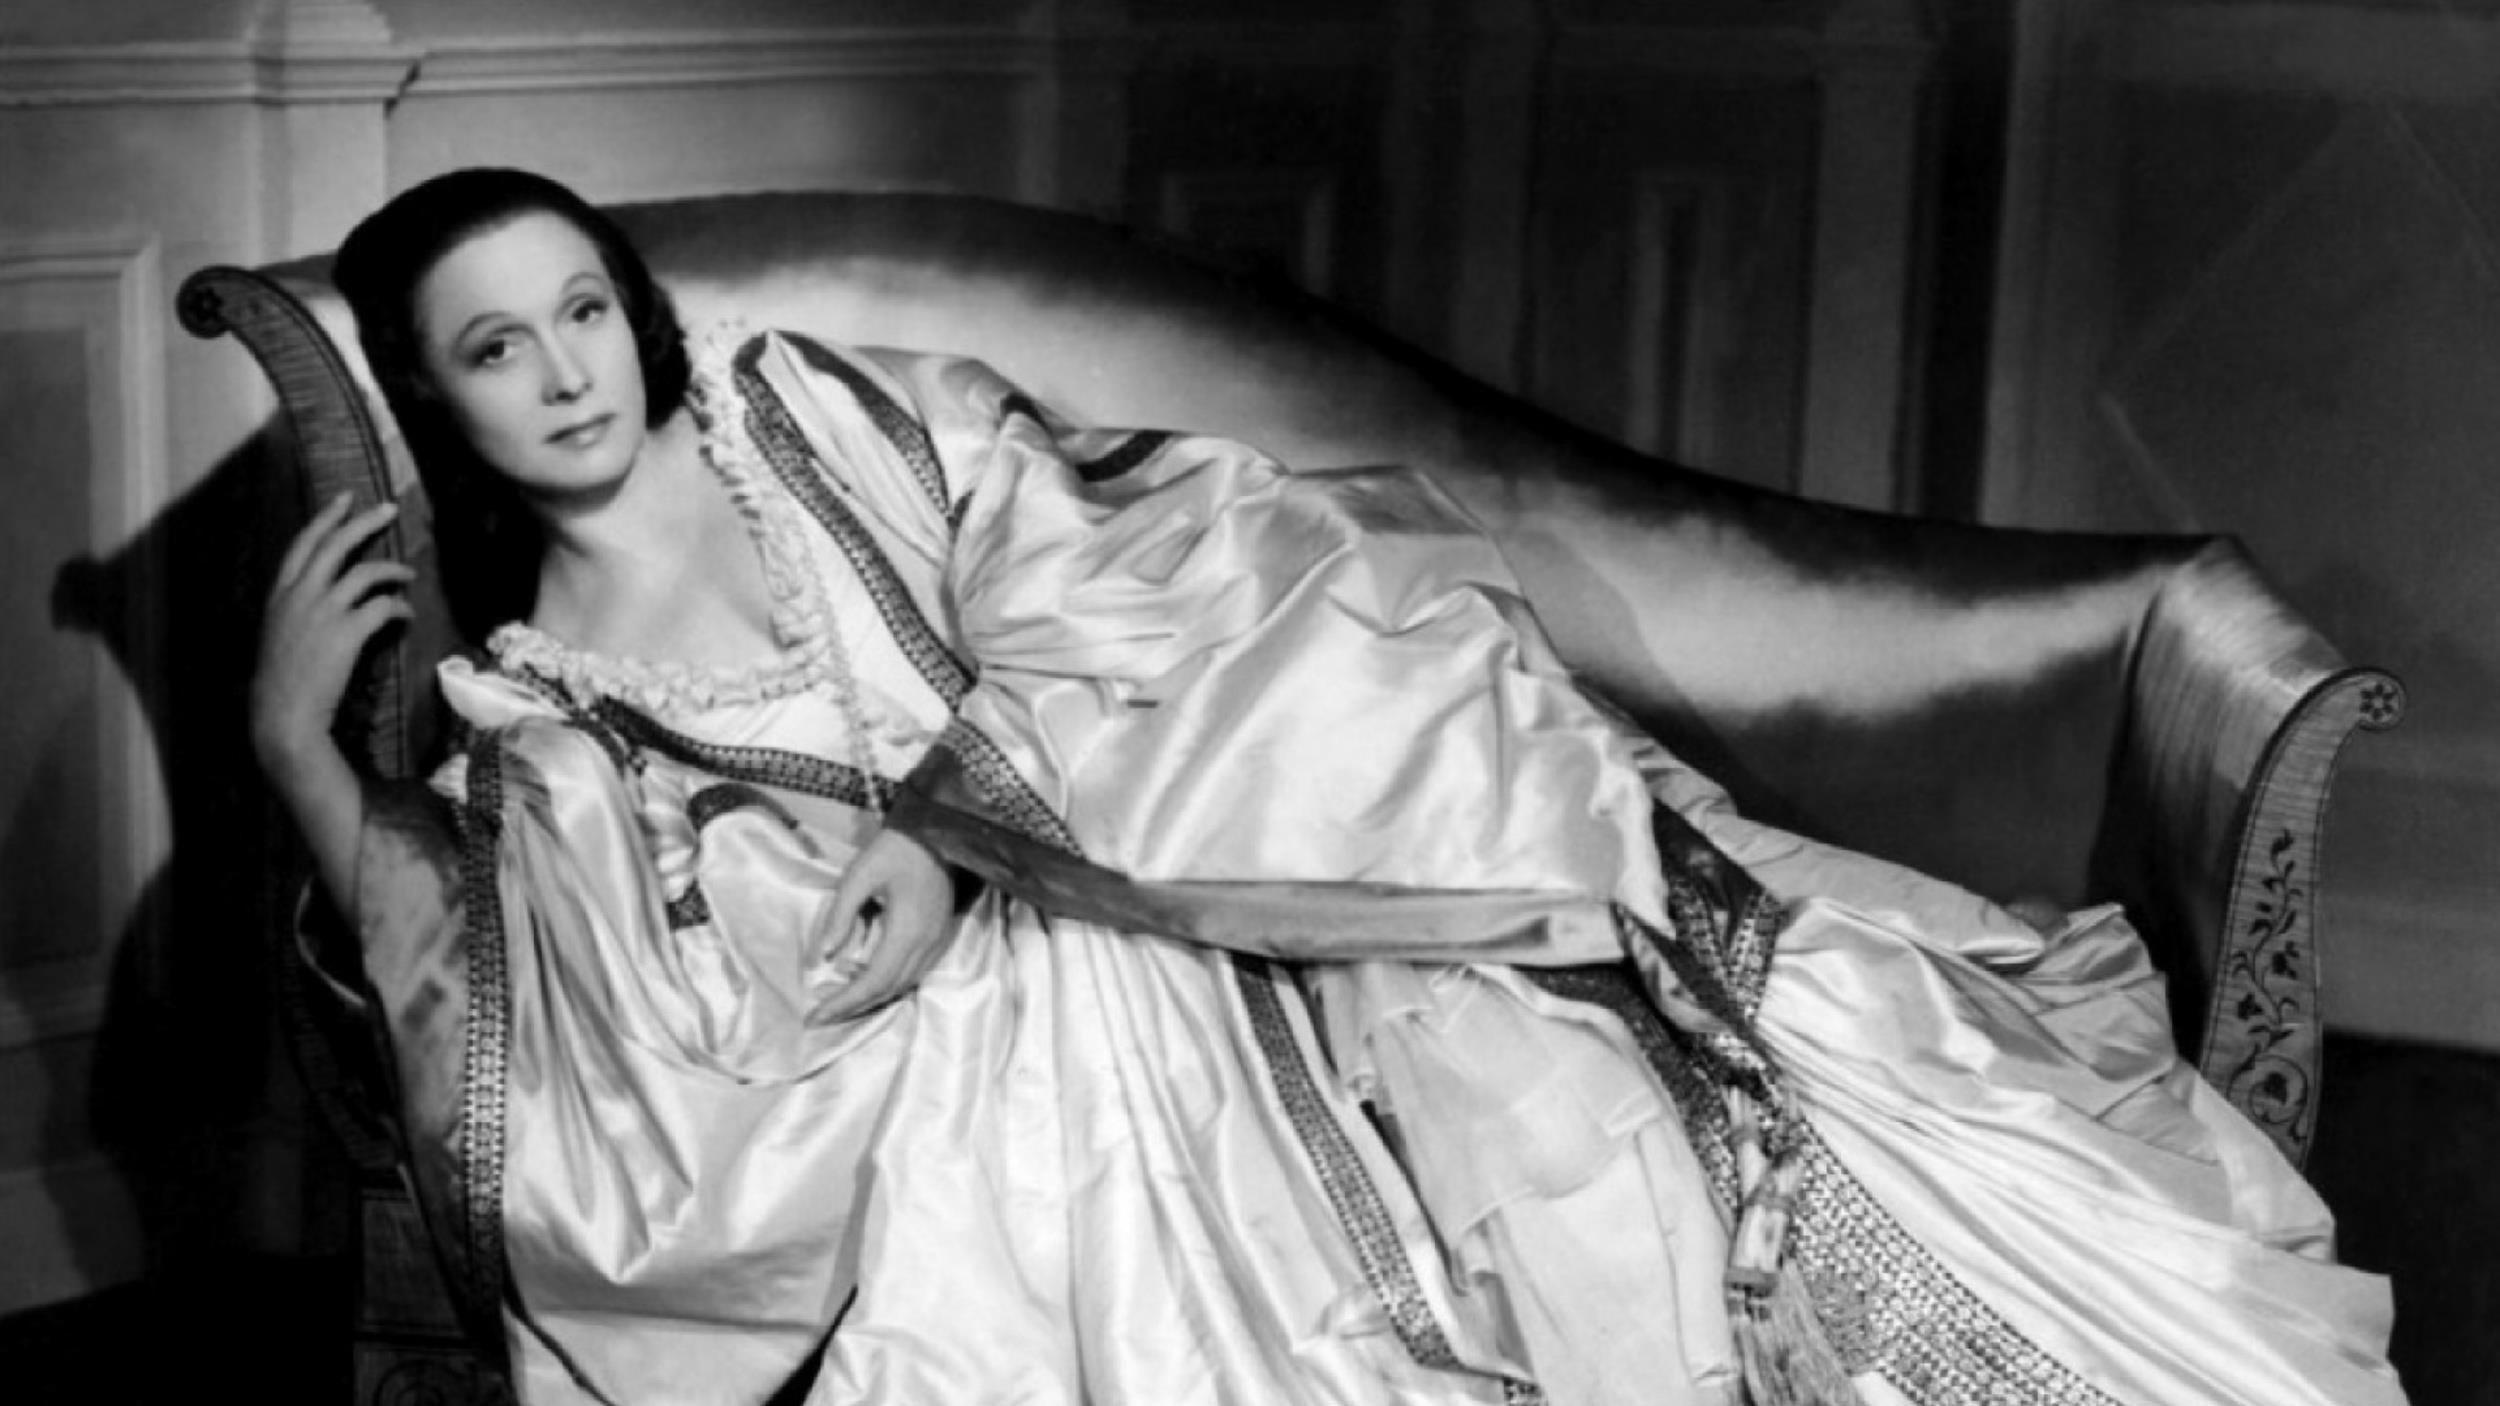 <p>Marcel Carné’s decadent romance stars Arletty as a courtesan who is pursued by four suitors hailing from wildly different backgrounds. The film was surreptitiously made <em>during</em> the Nazi occupation of France like a real-life version of Ernst Lubitsch’s “To Be or Not to Be” and is considered by many to be the greatest French film of all time. It’s certainly the most daring. François Truffaut said he would “give up all my films to have directed ‘Children of Paradise’,” in case you needed further provocation to finally check out this classic.</p><p>You may also like: <a href='https://www.yardbarker.com/entertainment/articles/20_of_the_most_unique_voices_in_all_of_music_031924/s1__39104808'>20 of the most unique voices in all of music</a></p>